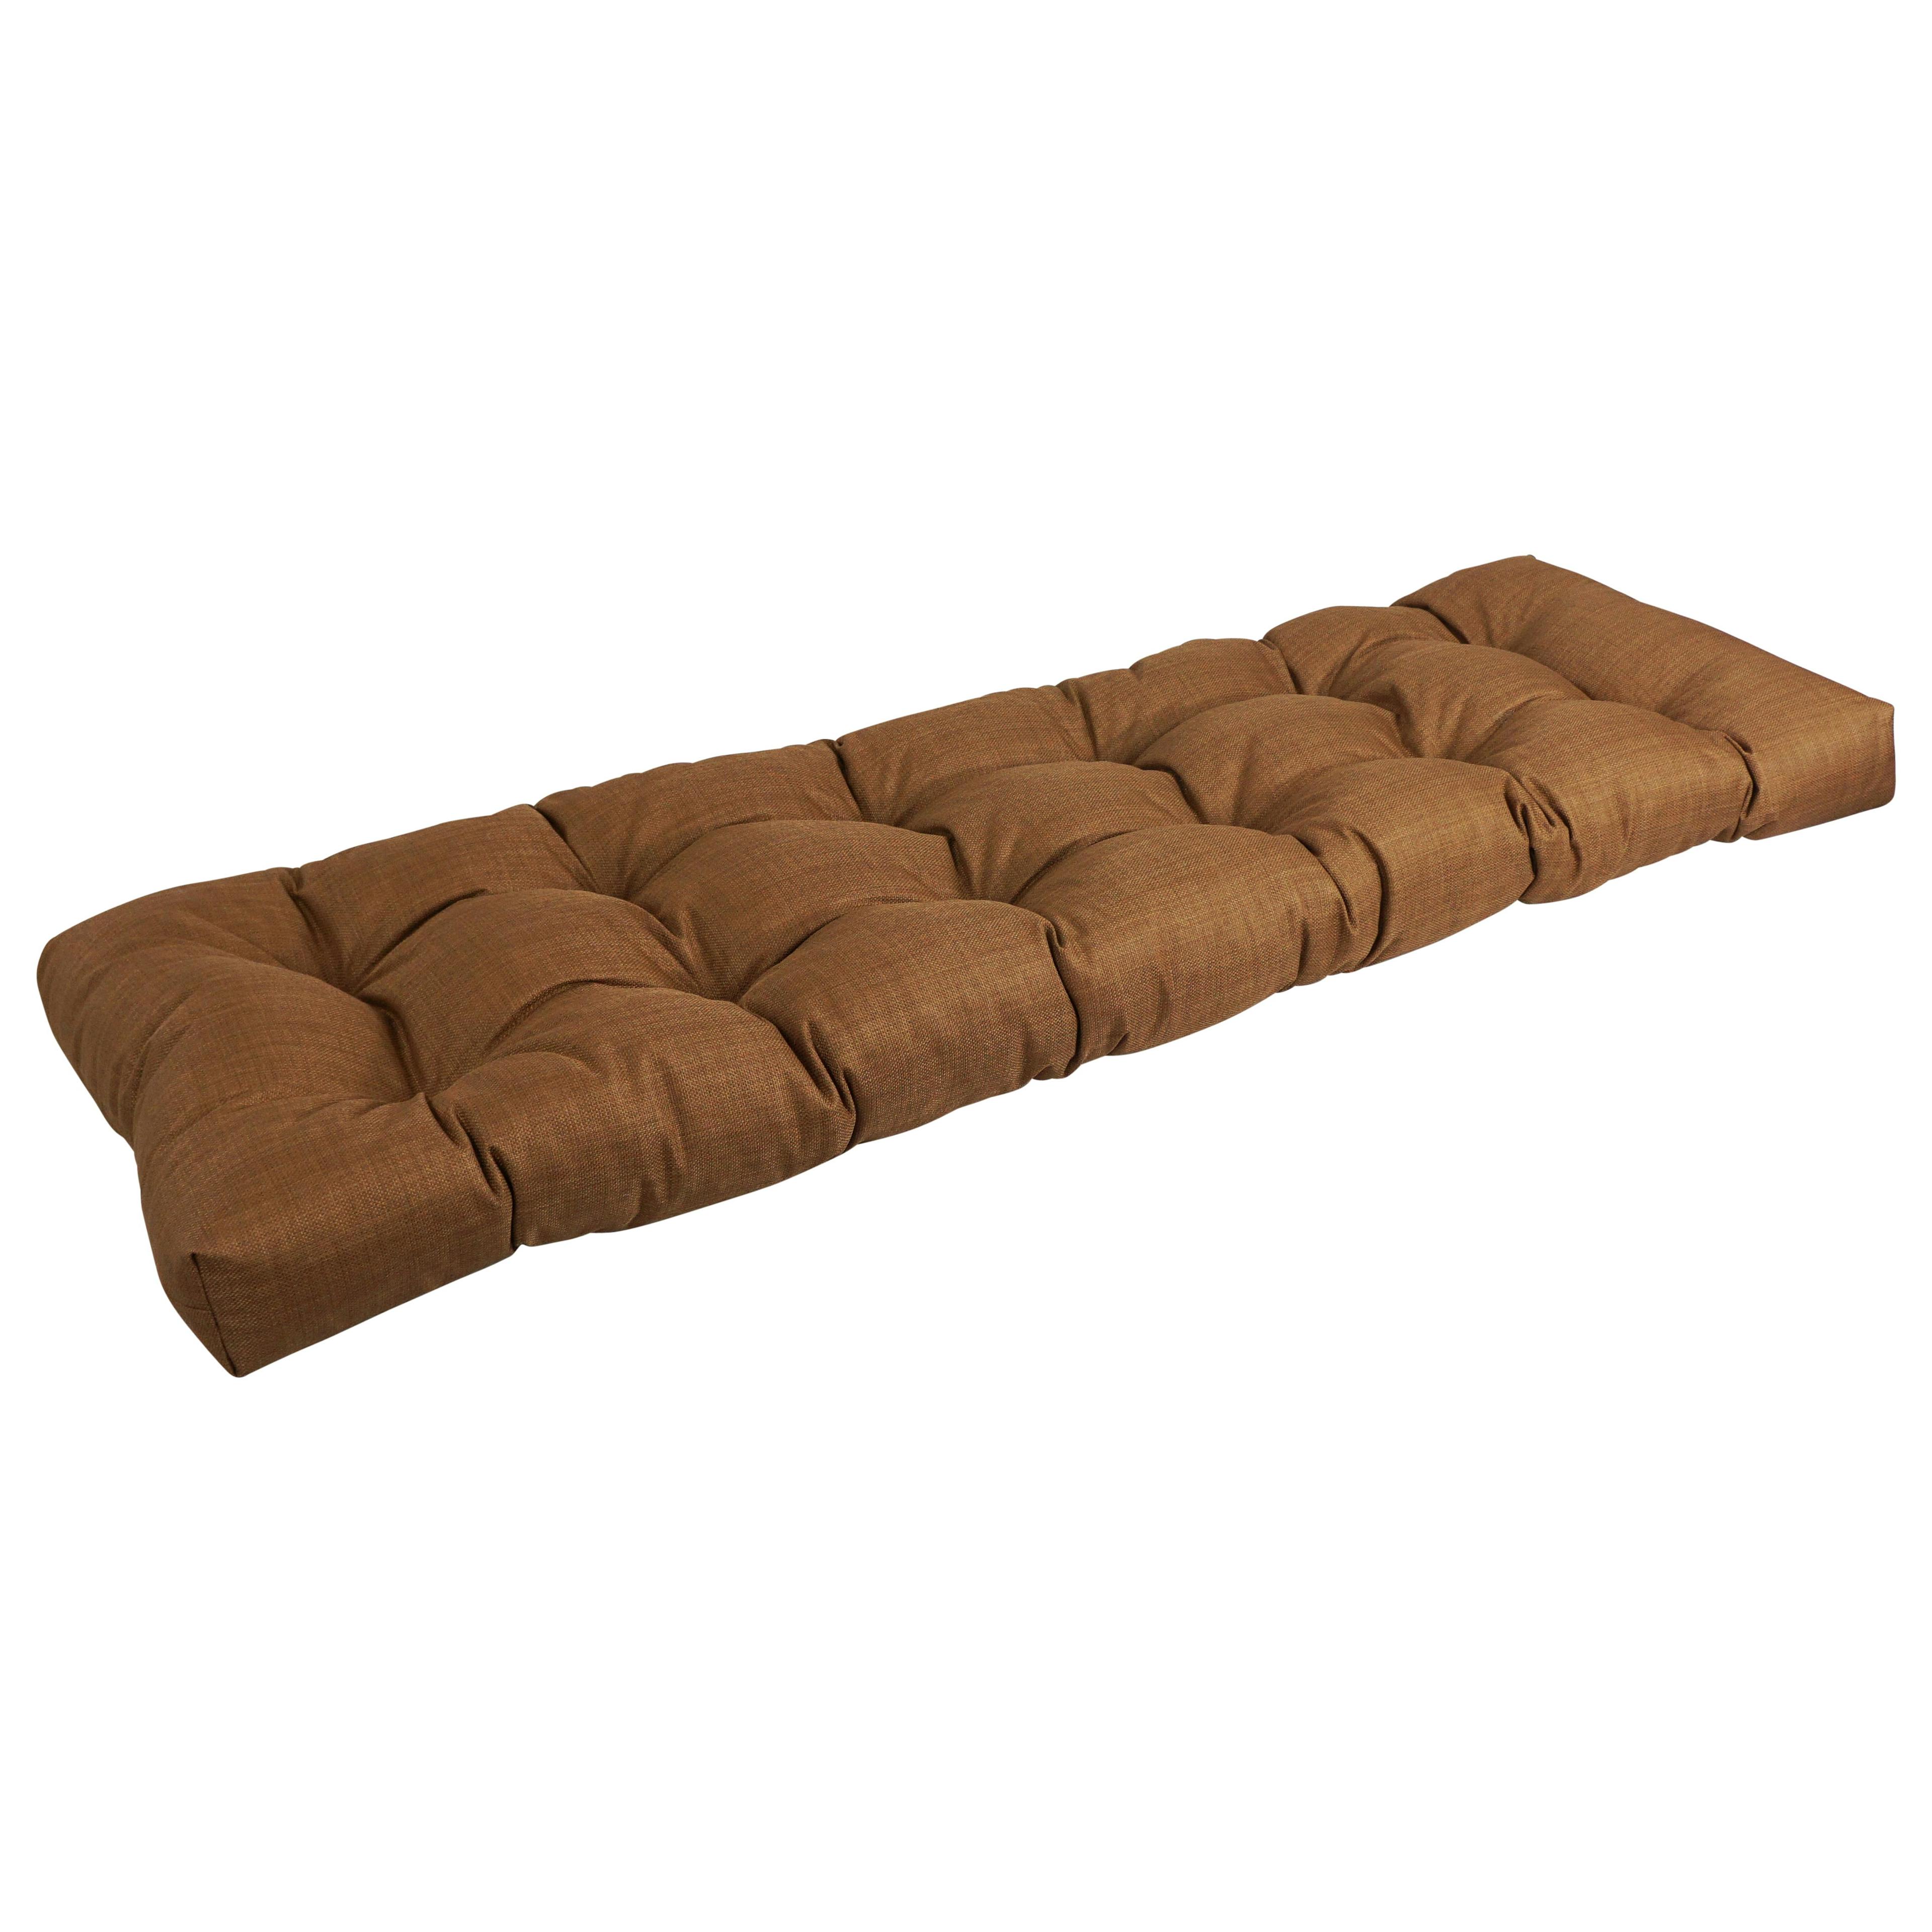 Mocha Tufted Outdoor Loveseat Cushion in Spun Polyester, 55" x 19"